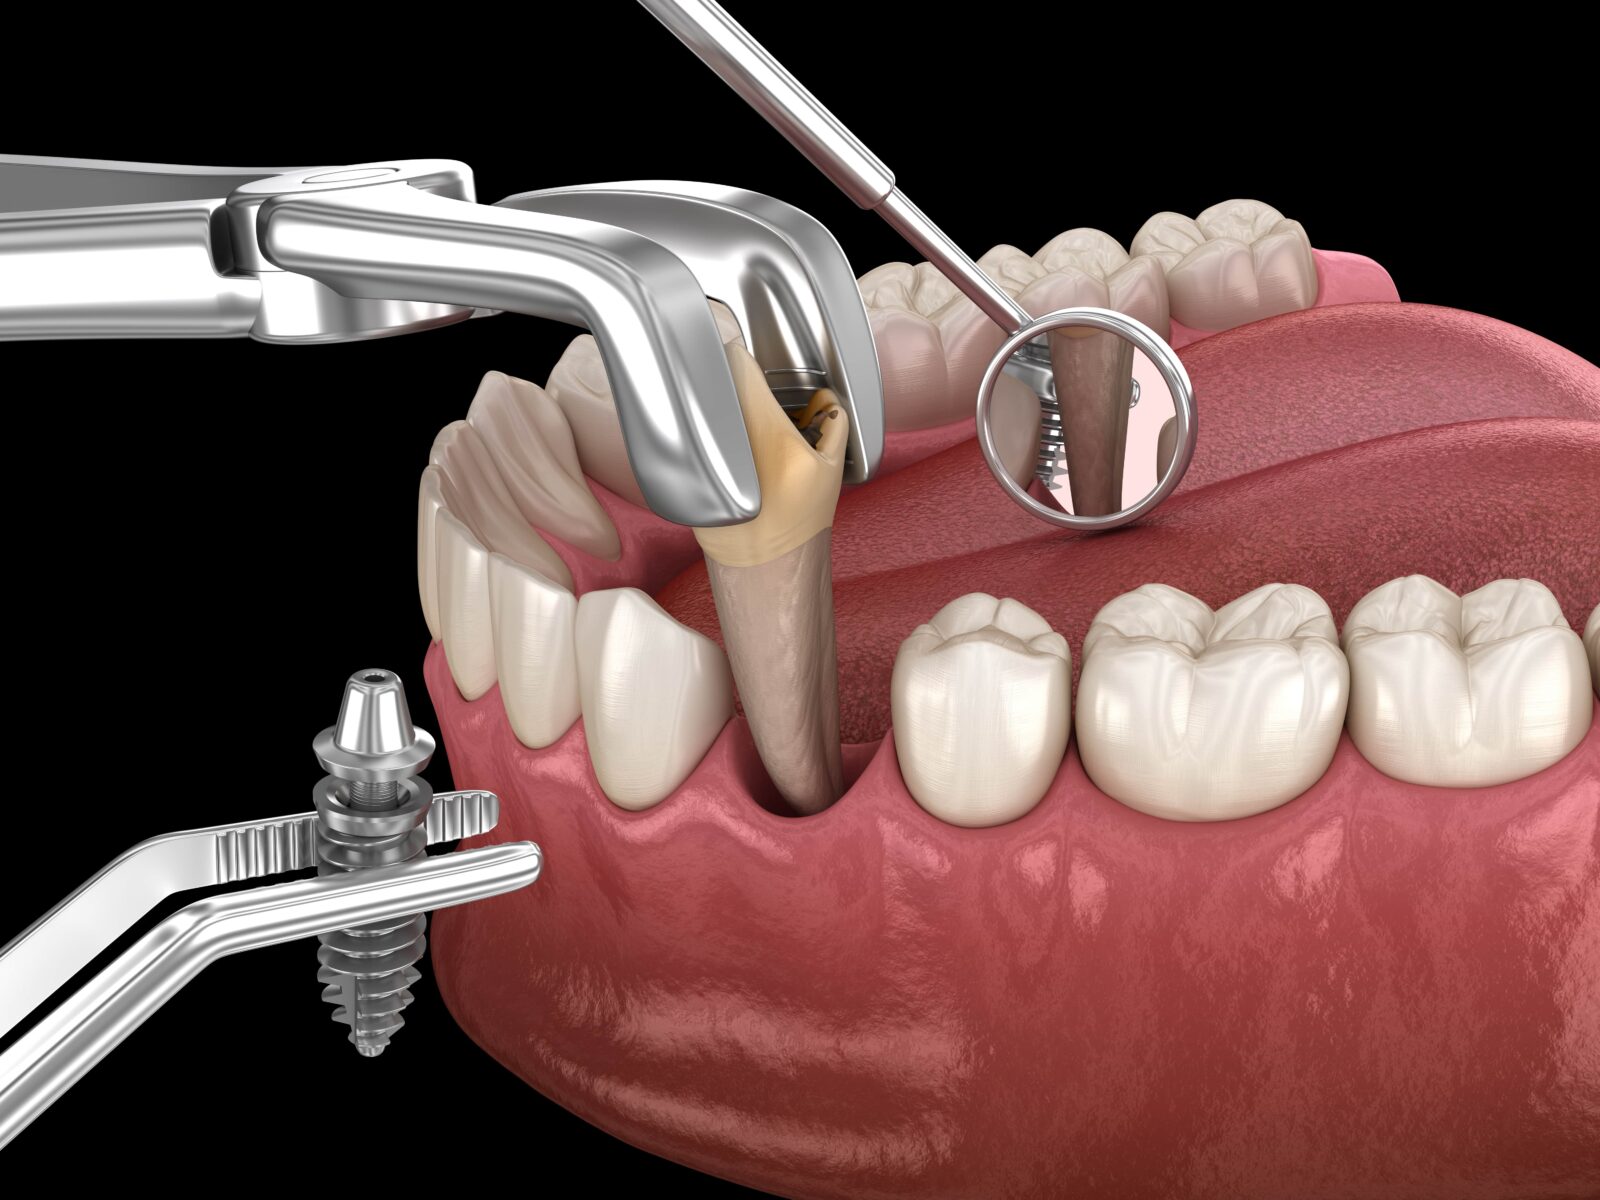 extracting tooth and placing dental implant